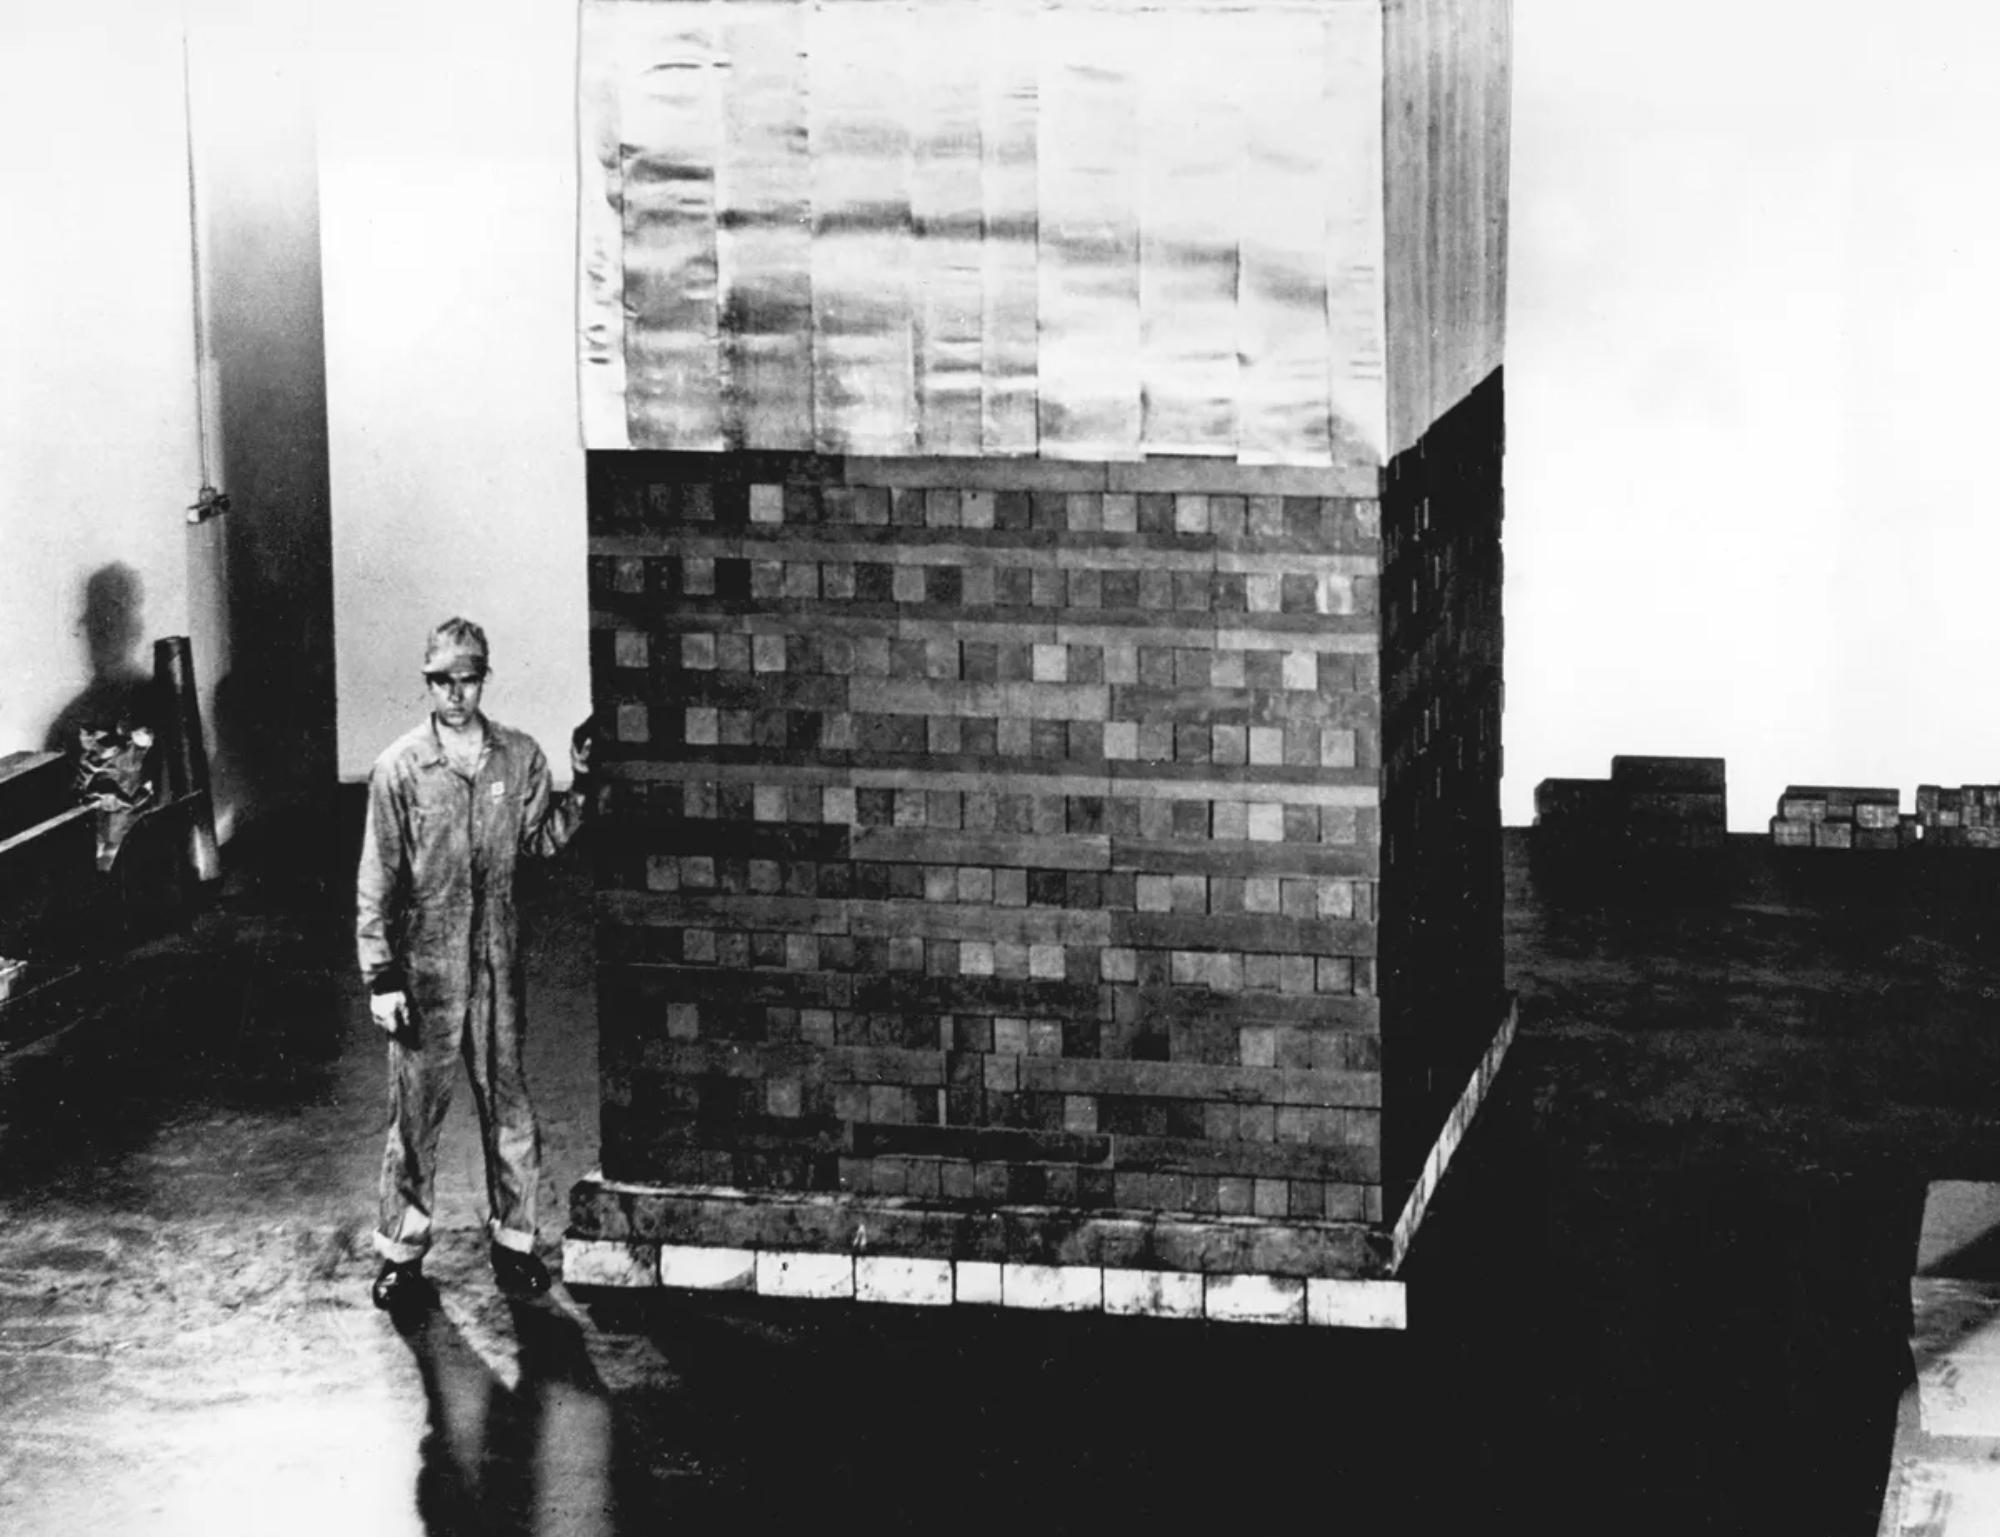 A black and white image of a man sitting next to what looks like a uniformly spaced pile of bricks. 